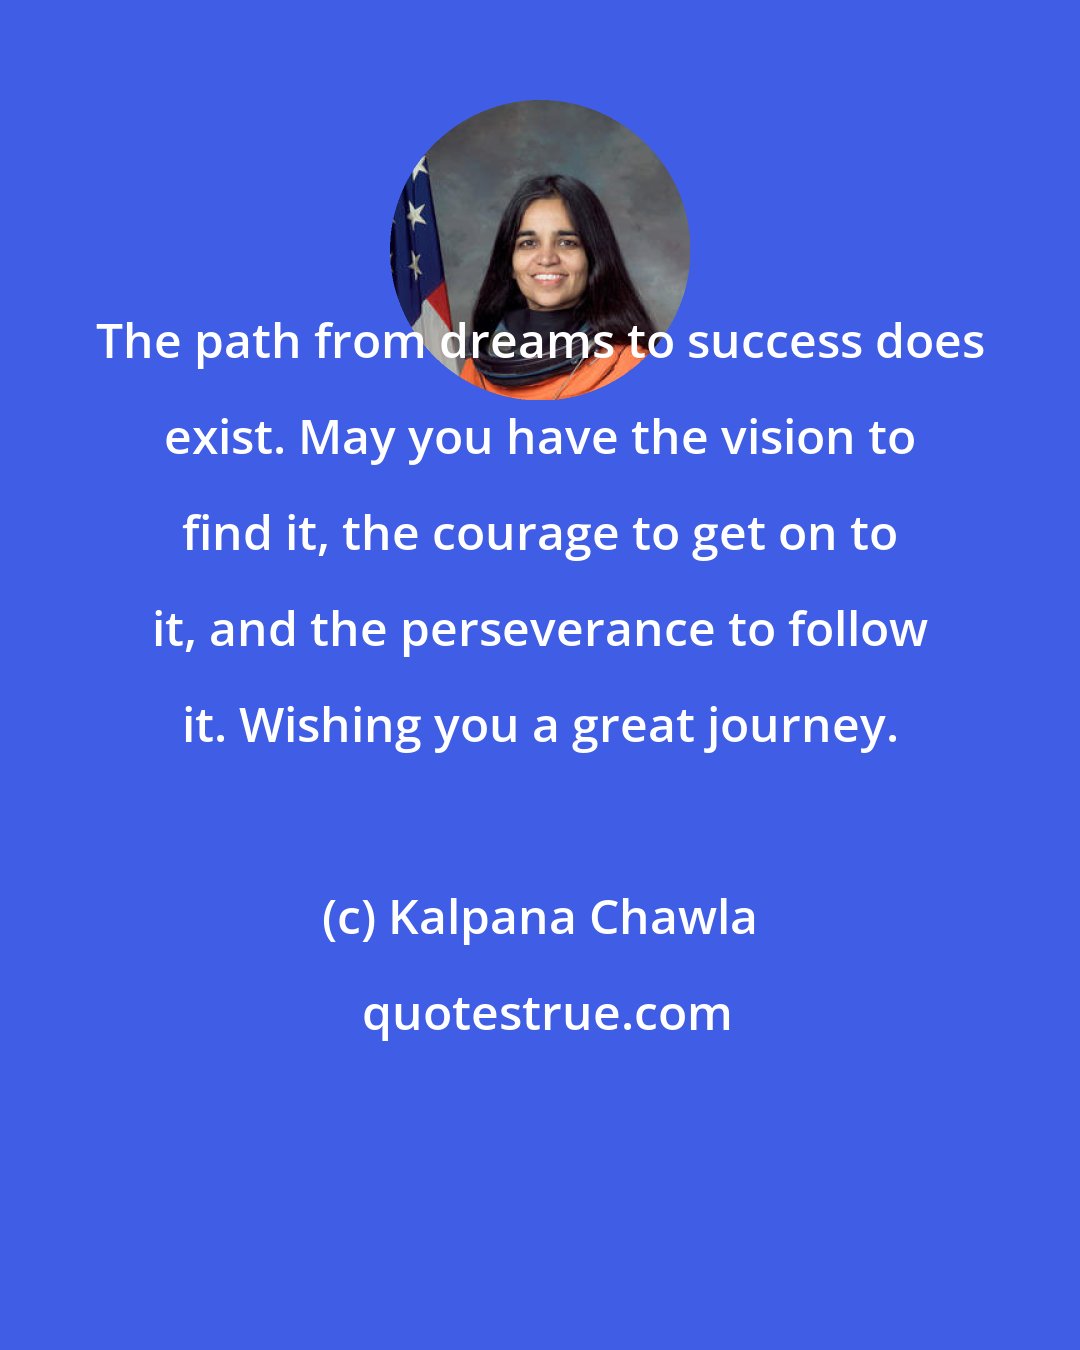 Kalpana Chawla: The path from dreams to success does exist. May you have the vision to find it, the courage to get on to it, and the perseverance to follow it. Wishing you a great journey.